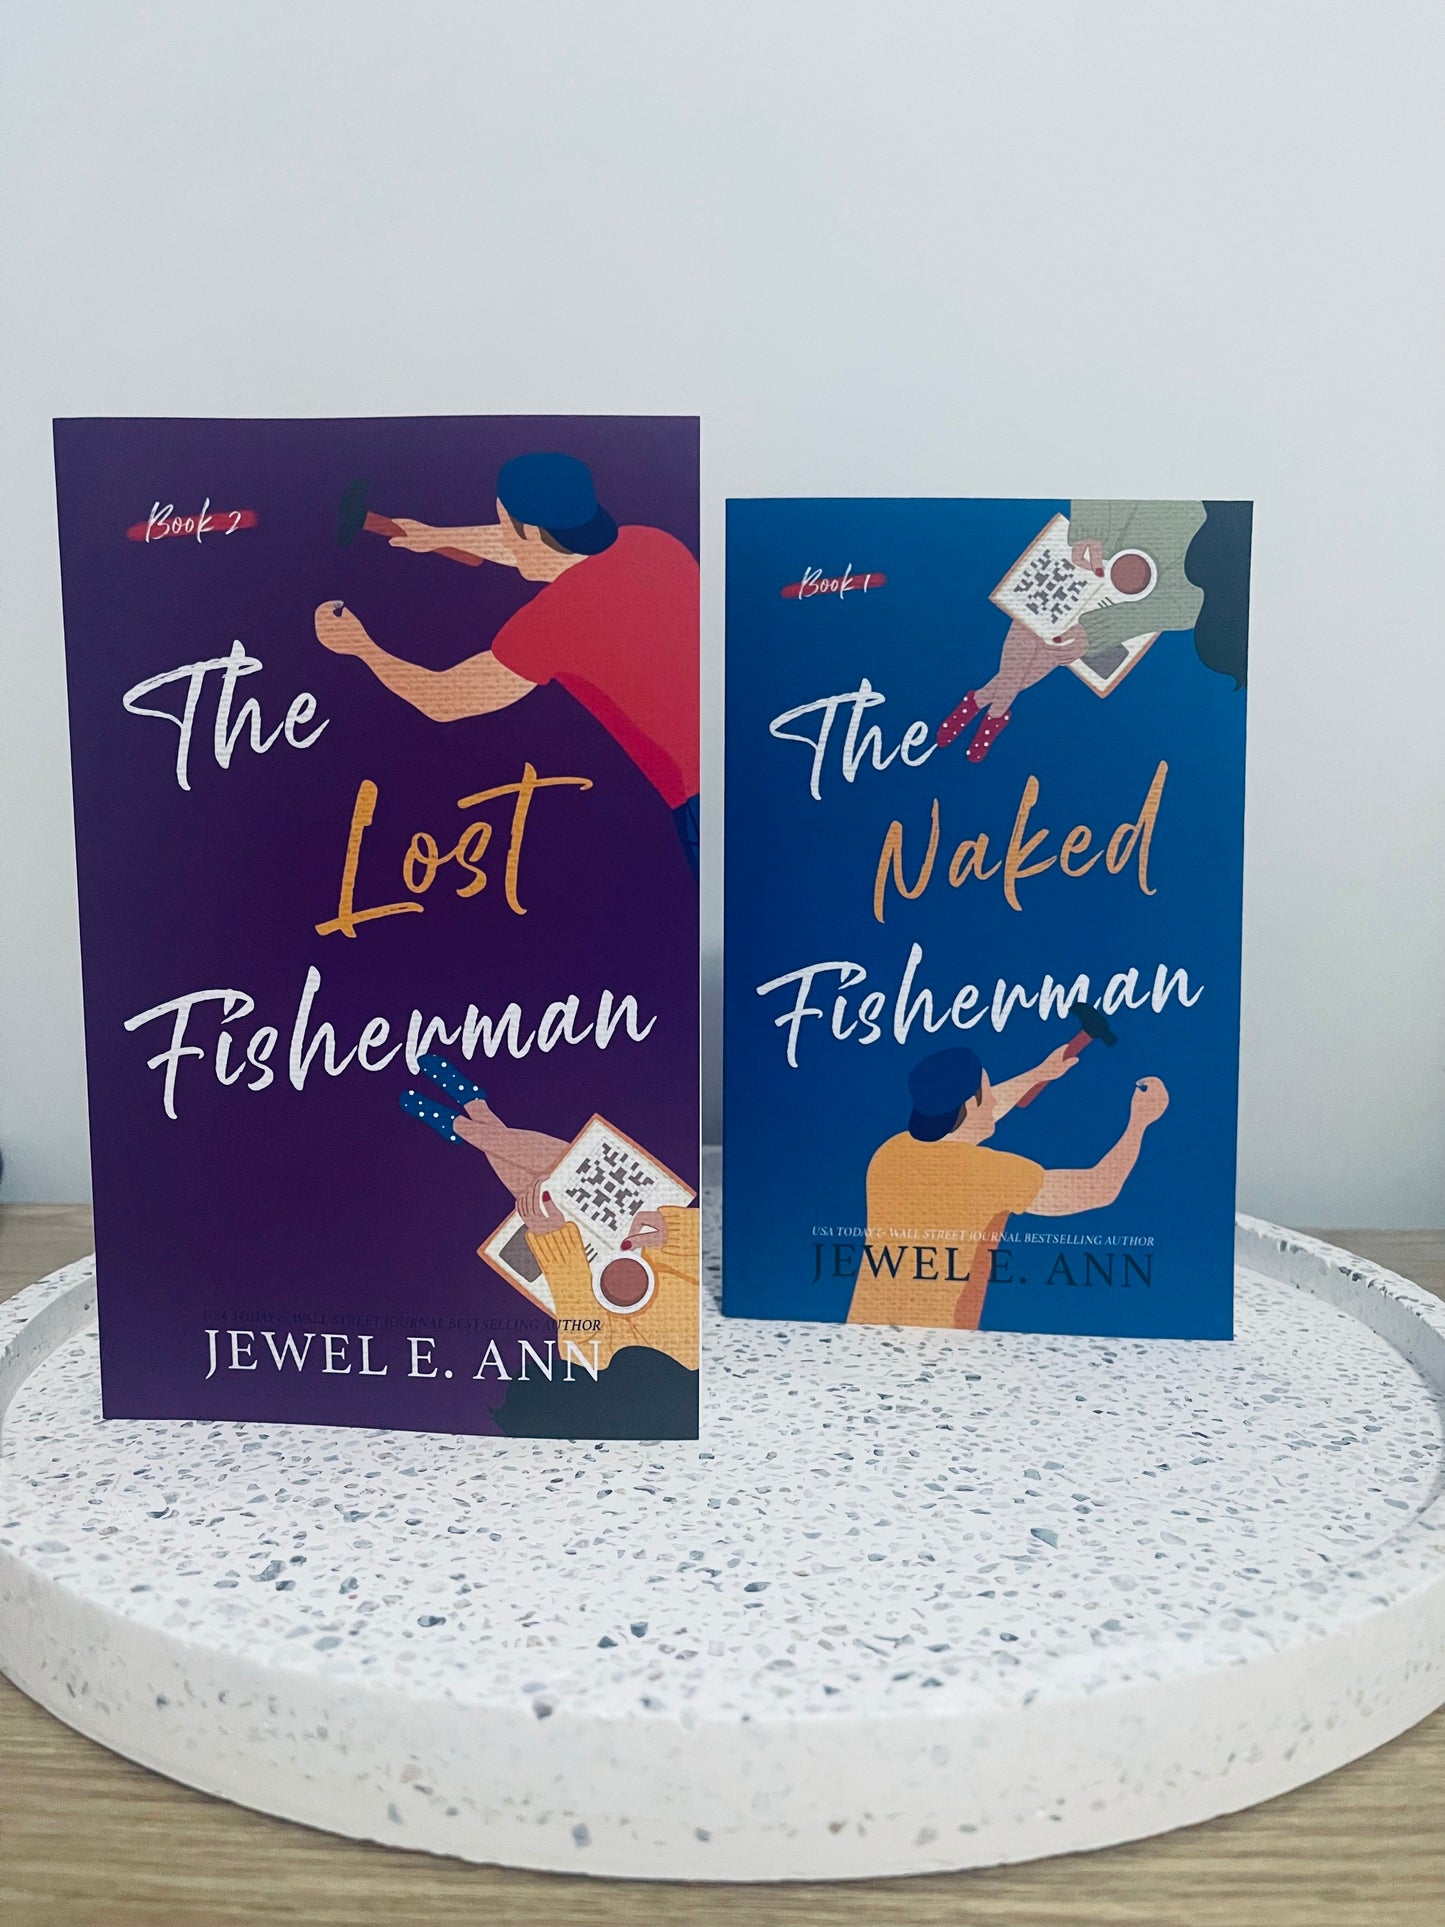 The Lost Fisherman by Jewel E Ann (Book 2)